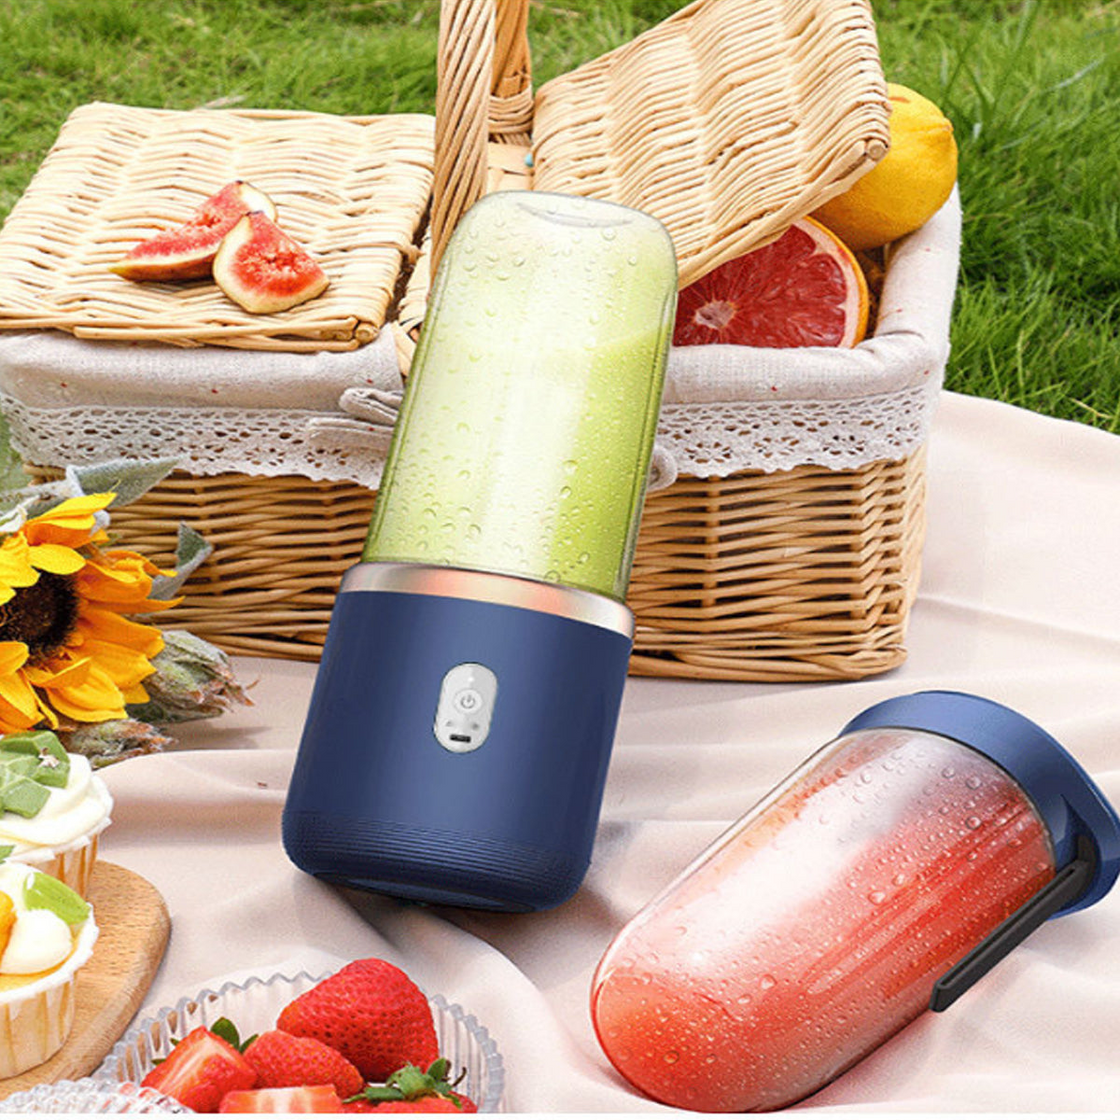 JuiceX Nourish On The Go Juicer Cups Rechargeable And Portable With 2/Cups